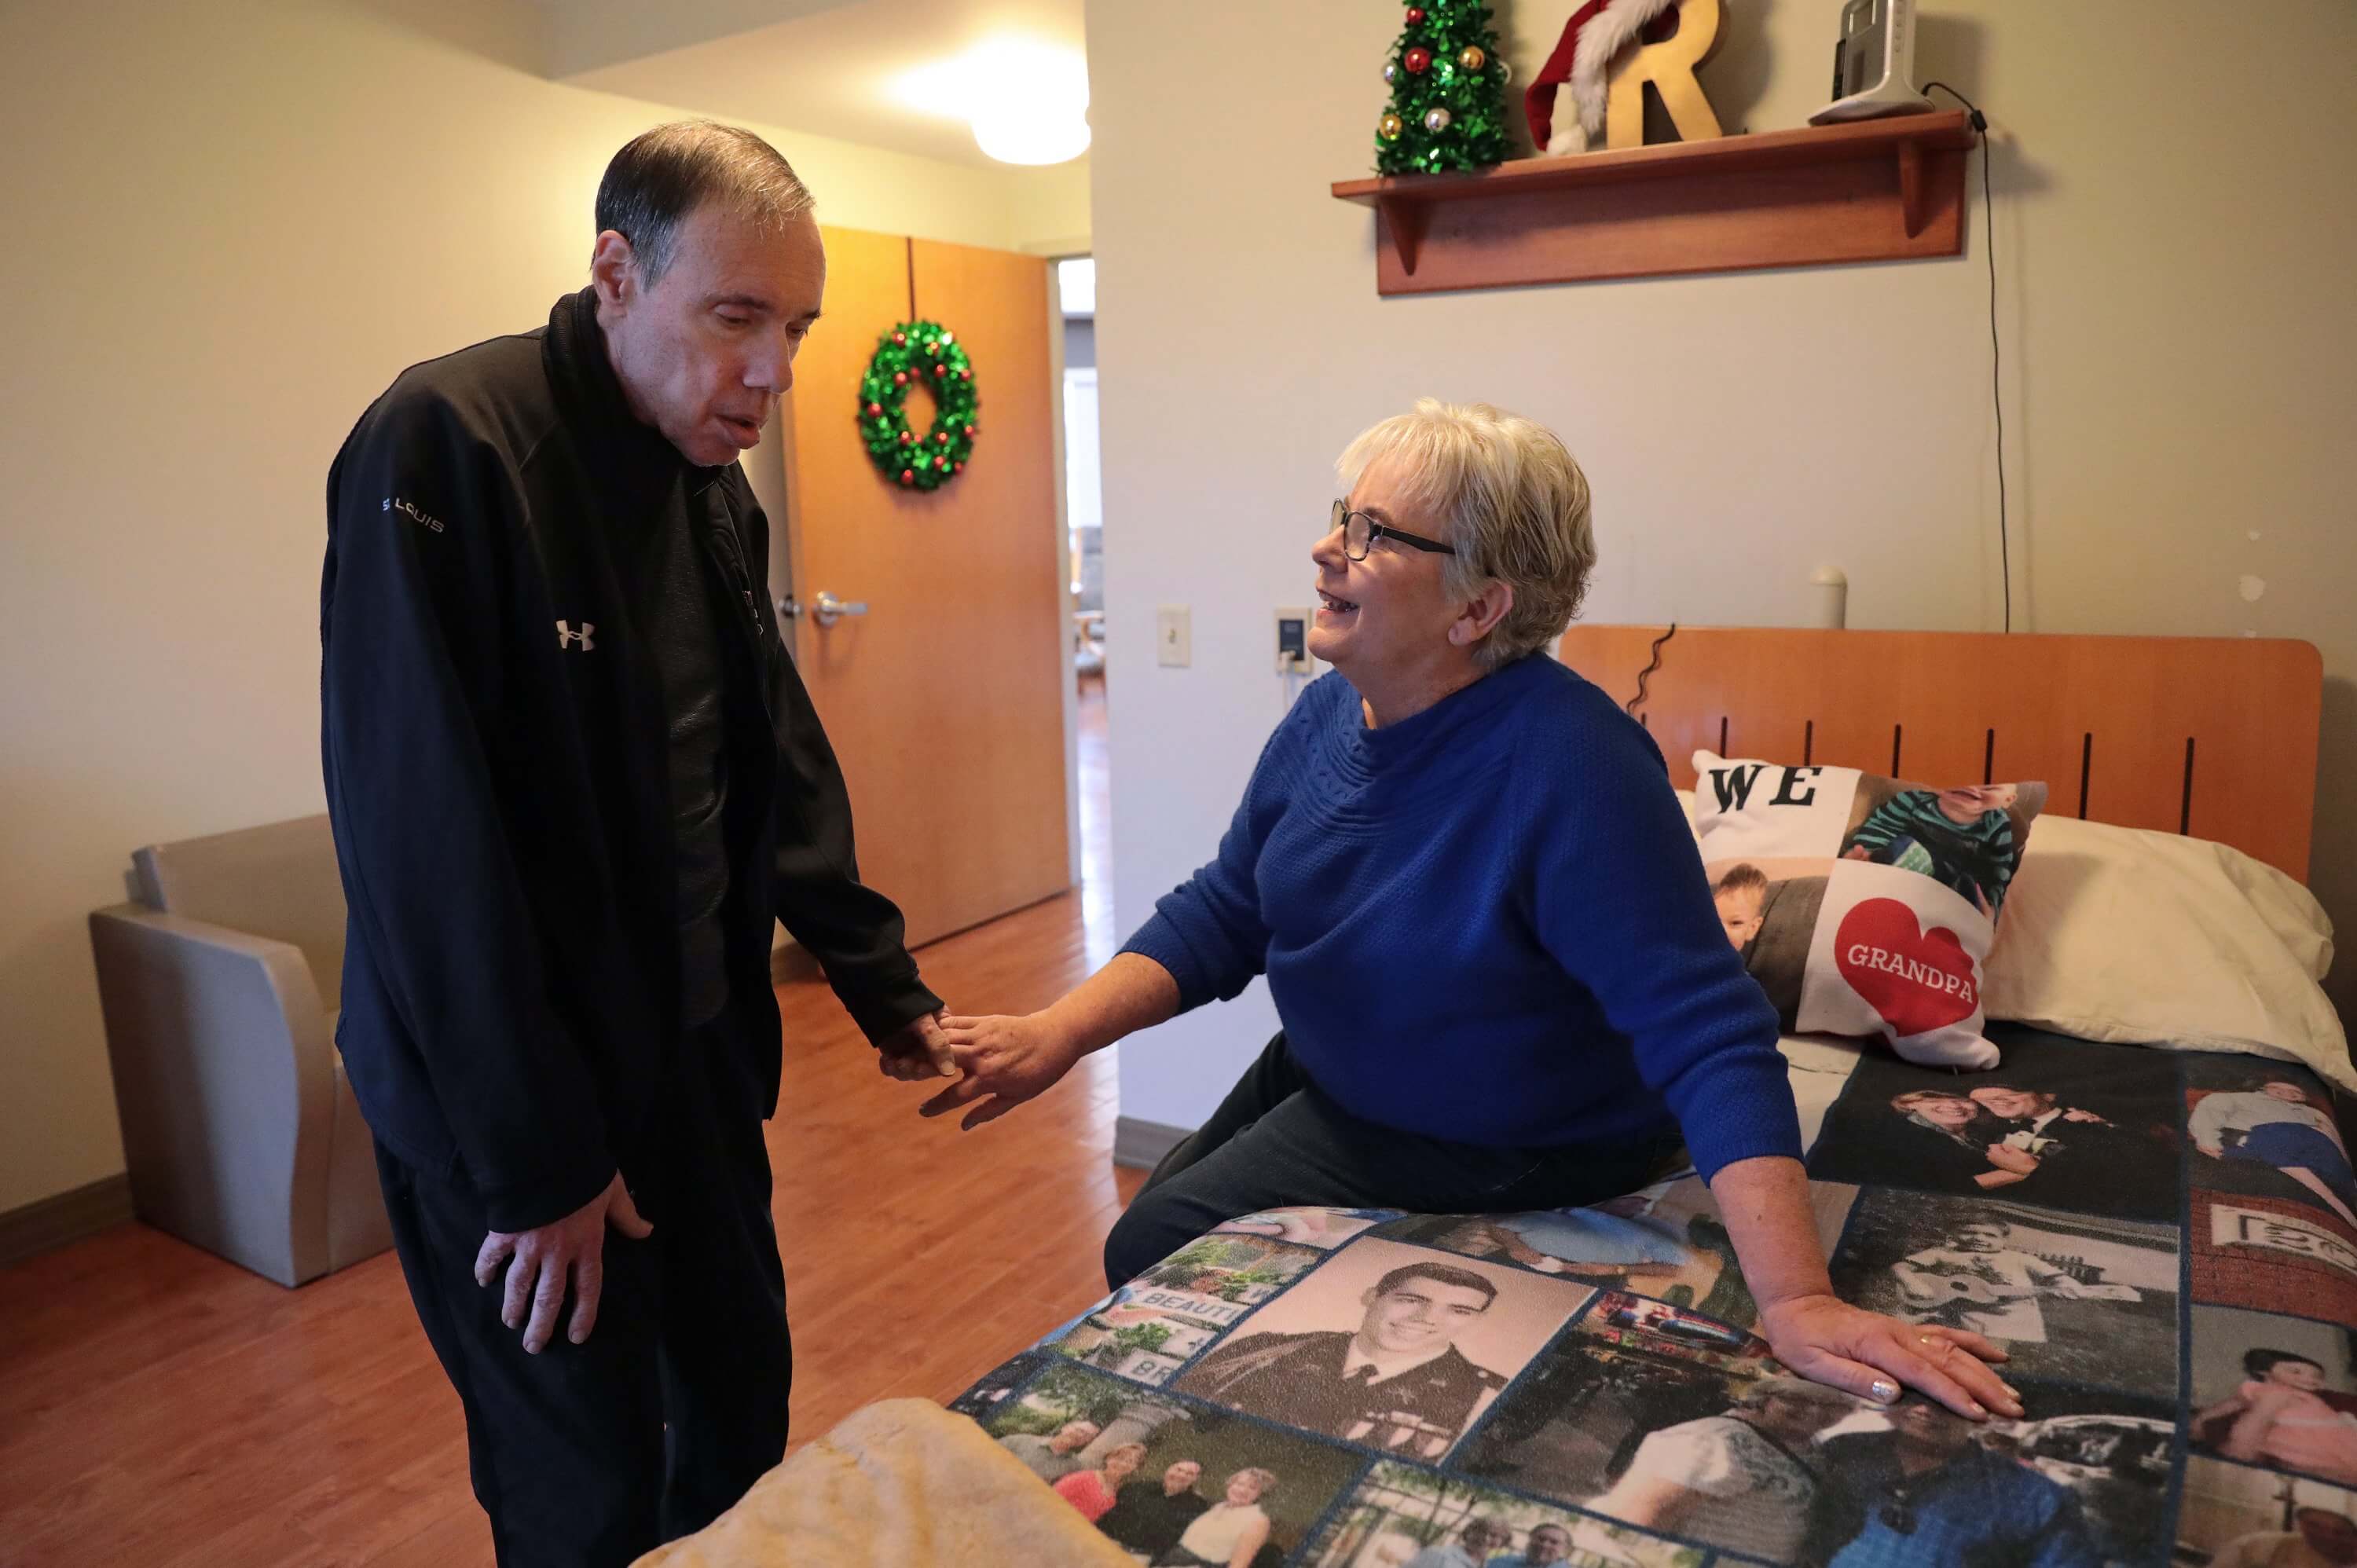 Mary Nicoletti, 66, visits Ron, 68, her husband of 45 years, at a skilled nursing facility in Valley Park on Thursday, Dec. 13, 2018. Ron was diagnosed with early onset Alzheimer's when he was 60 and his problems probably started four years before that, his wife says. “I was just ignorant,” she says. “I had no idea that someone at that age could have problems mentally.”